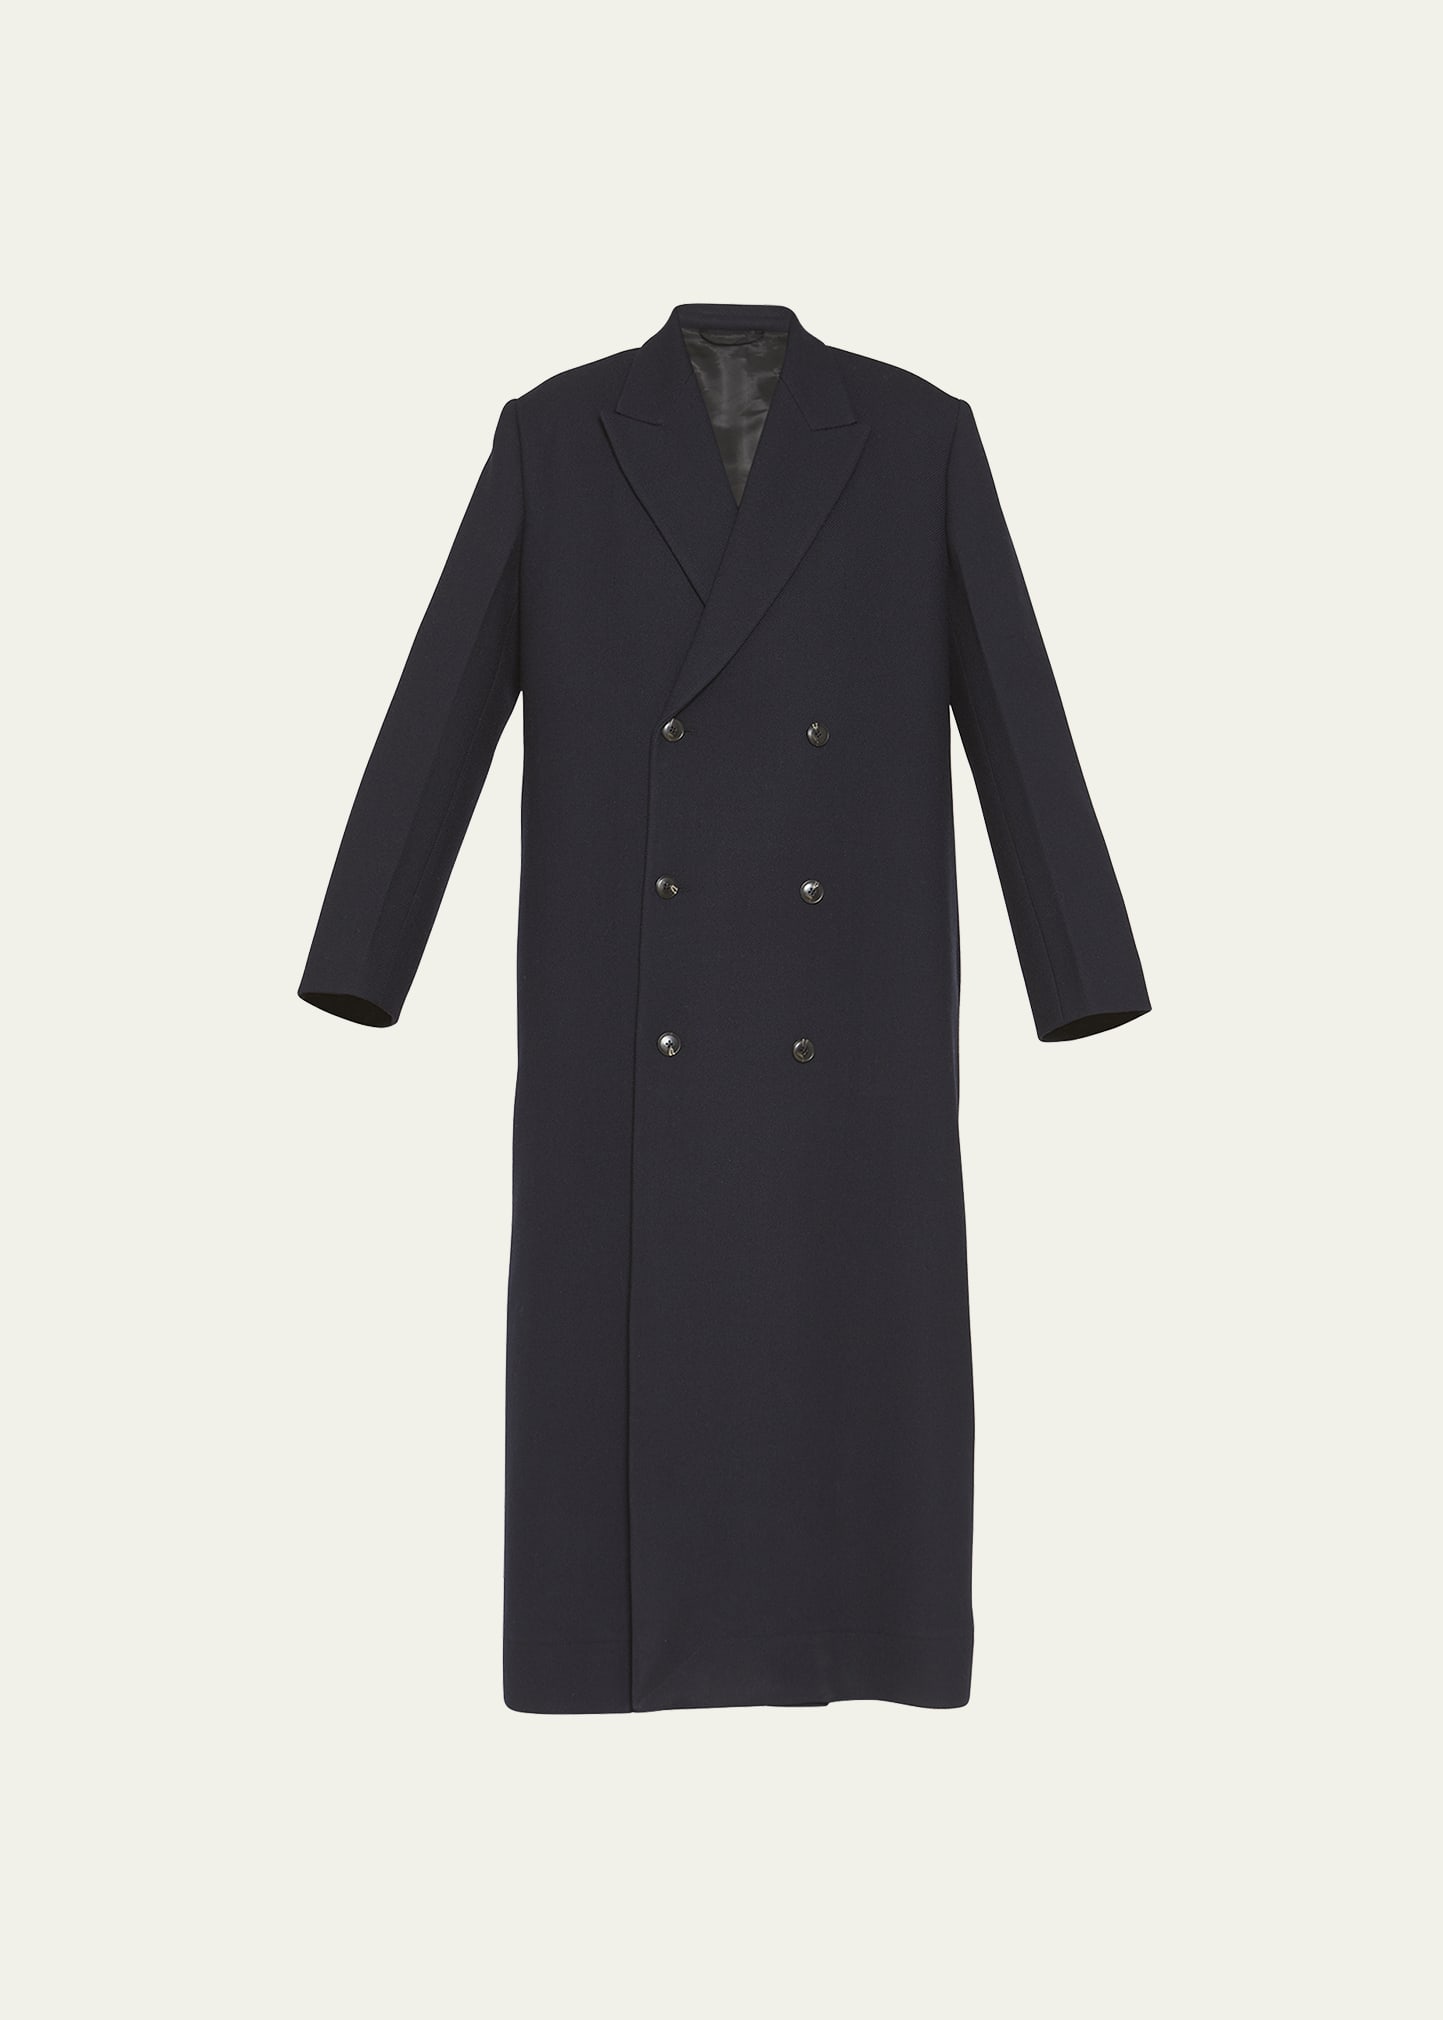 Quira Extra Long Double-Breasted Wool Overcoat